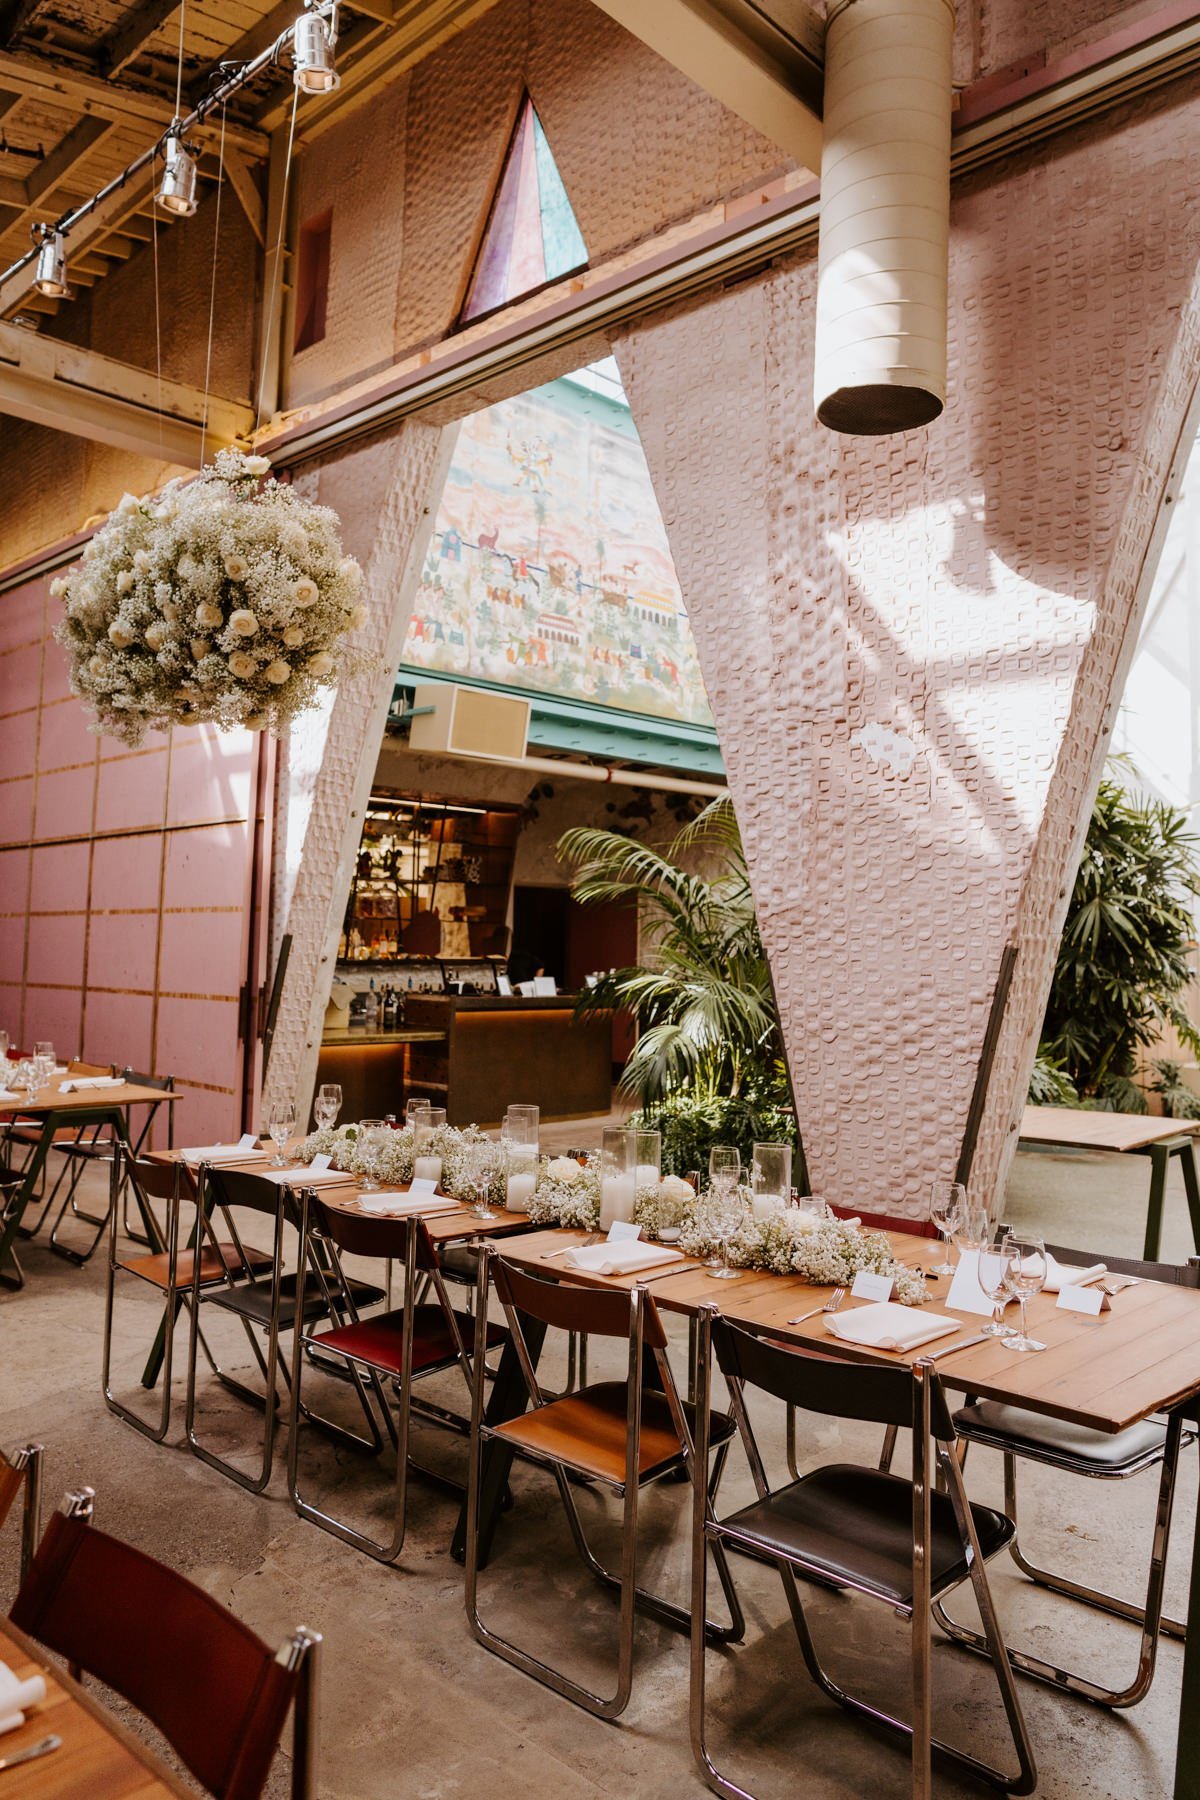 Grass Room DTLA Wedding Reception, Whimsical floral reception decor, Photo by Tida Svy, Los Angeles Wedding Photographer